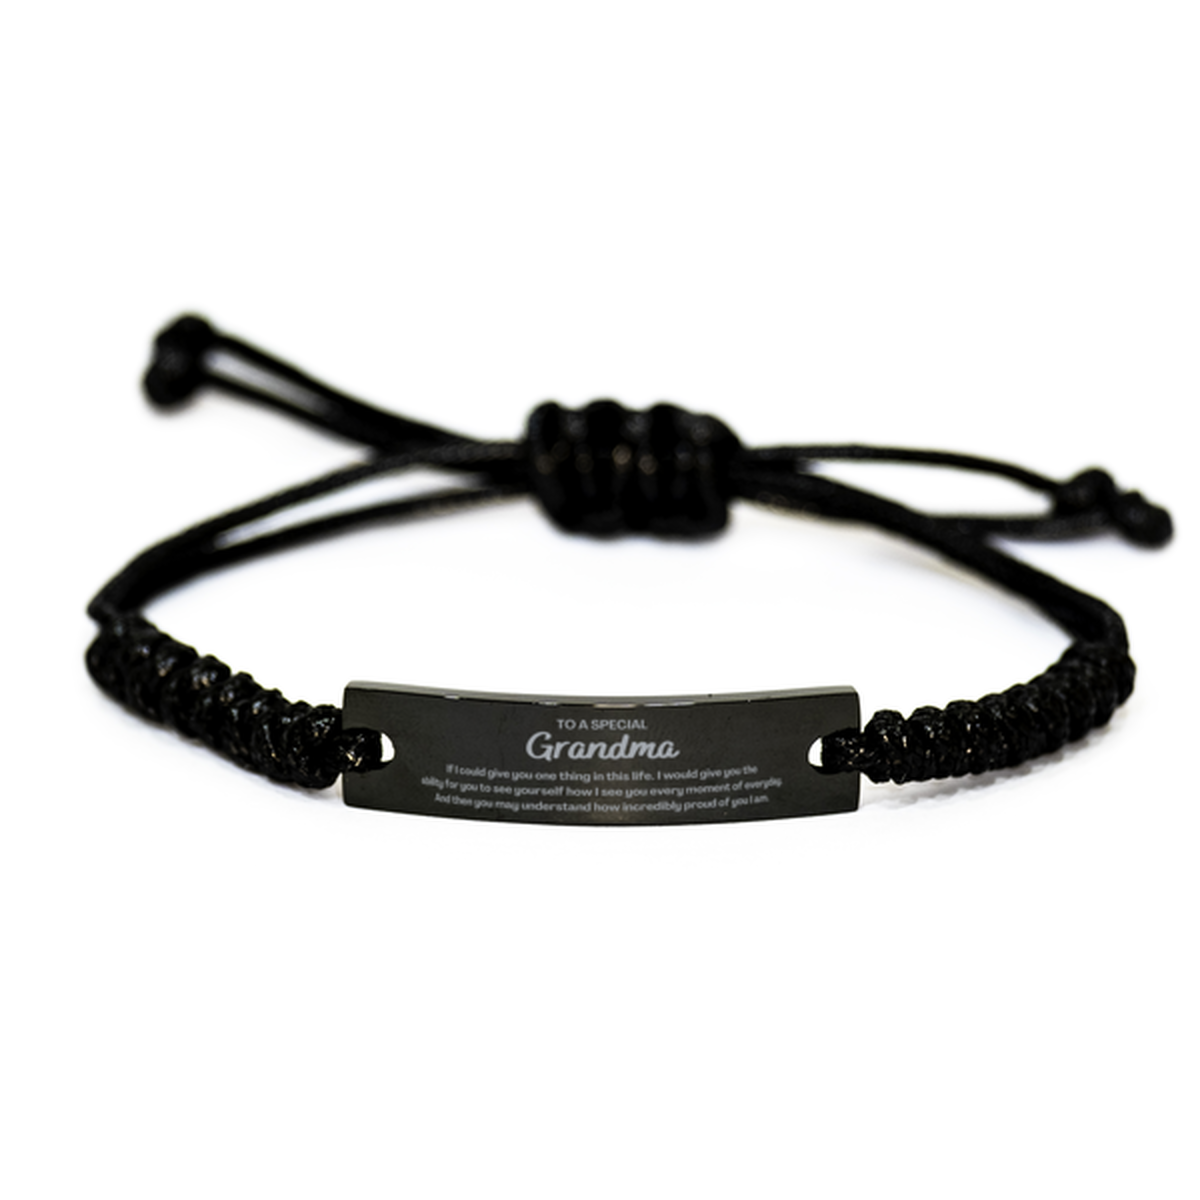 To My Grandma Black Rope Bracelet, Gifts For Grandma Engraved, Inspirational Gifts for Christmas Birthday, Epic Gifts for Grandma To A Special Grandma how incredibly proud of you I am